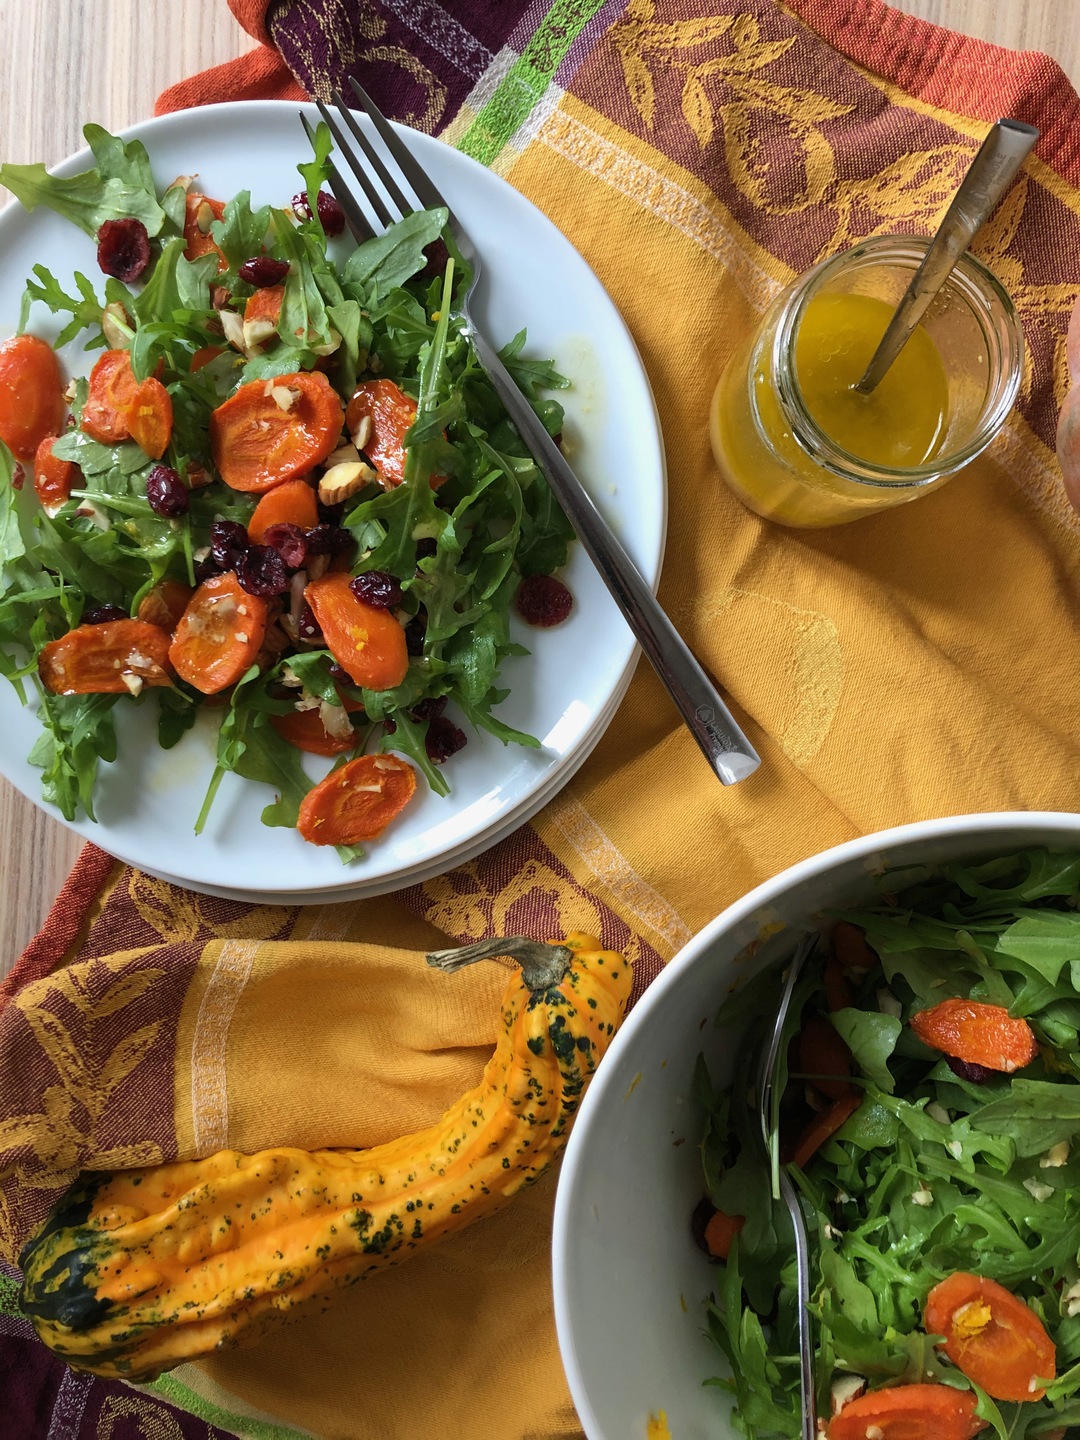 Salad with carrots, cranberries, and orange dressing